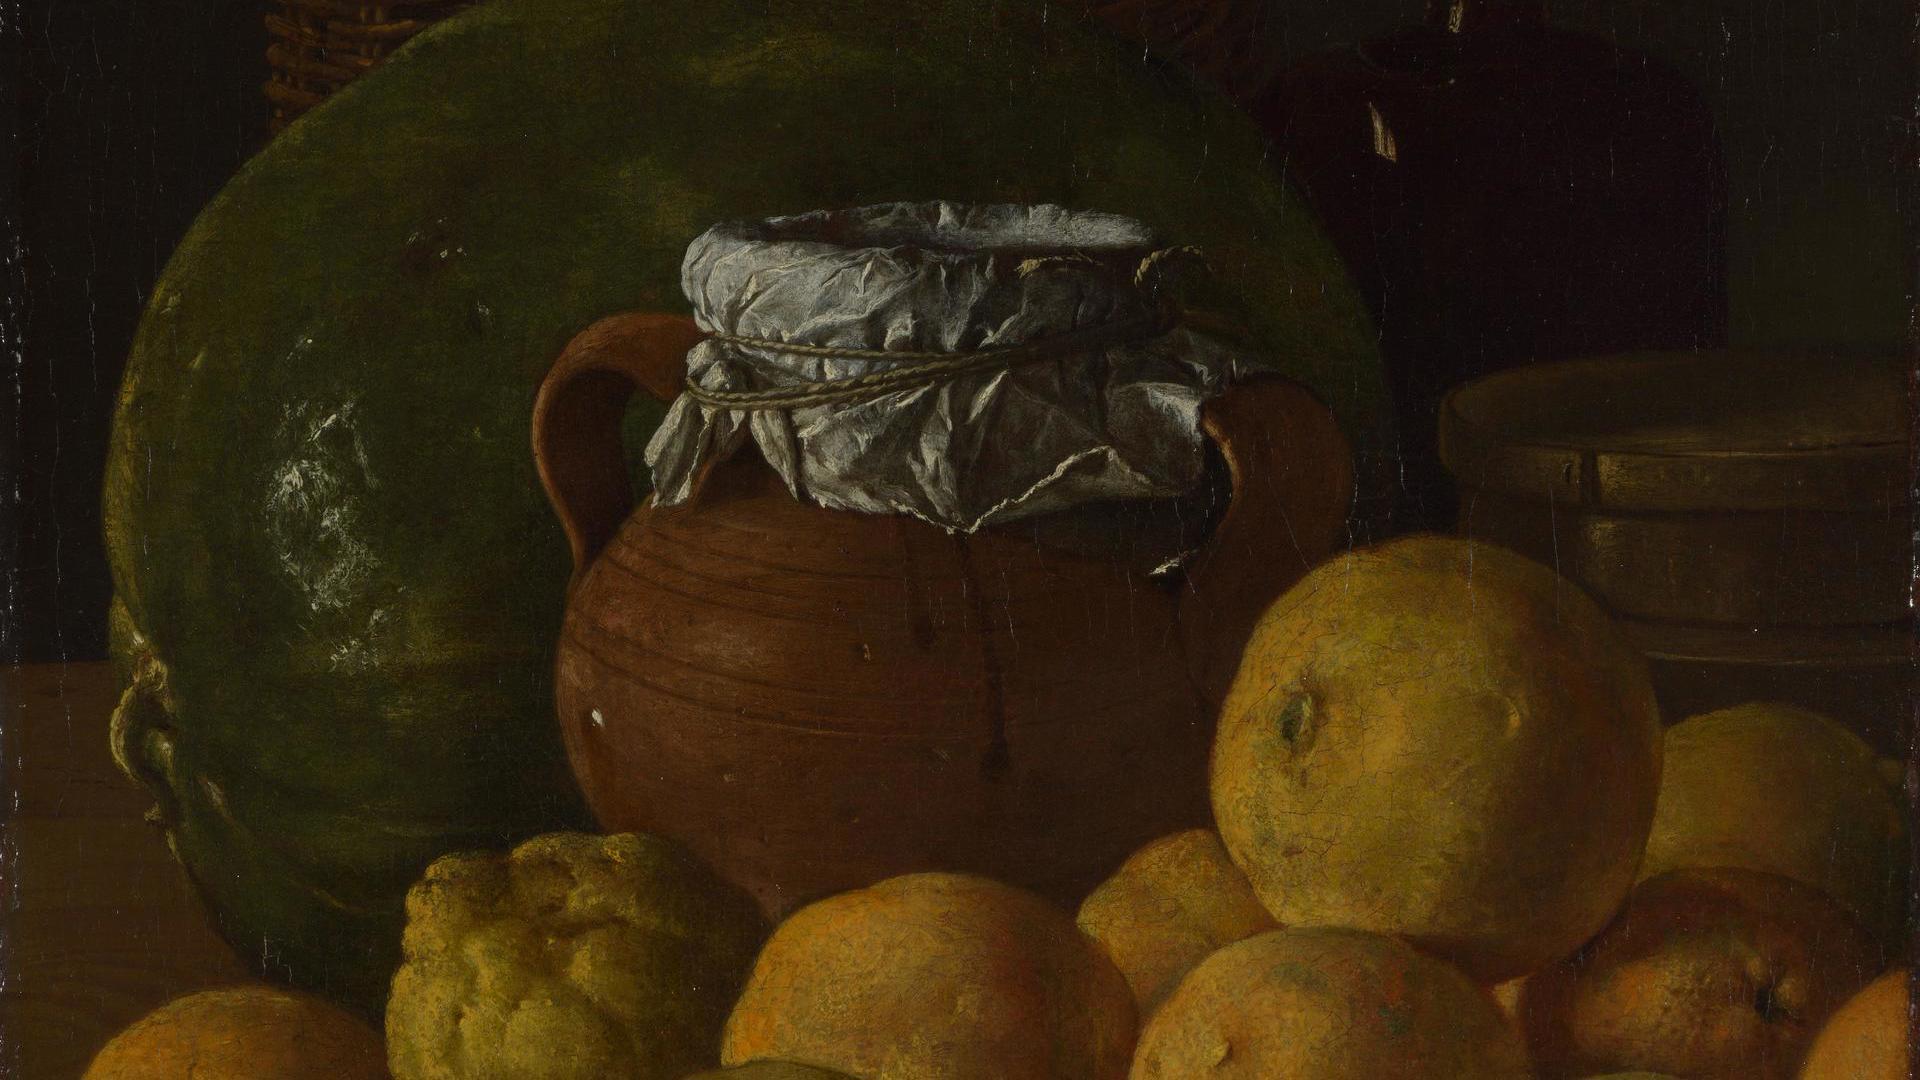 Still Life with Lemons and Oranges by Luis Meléndez